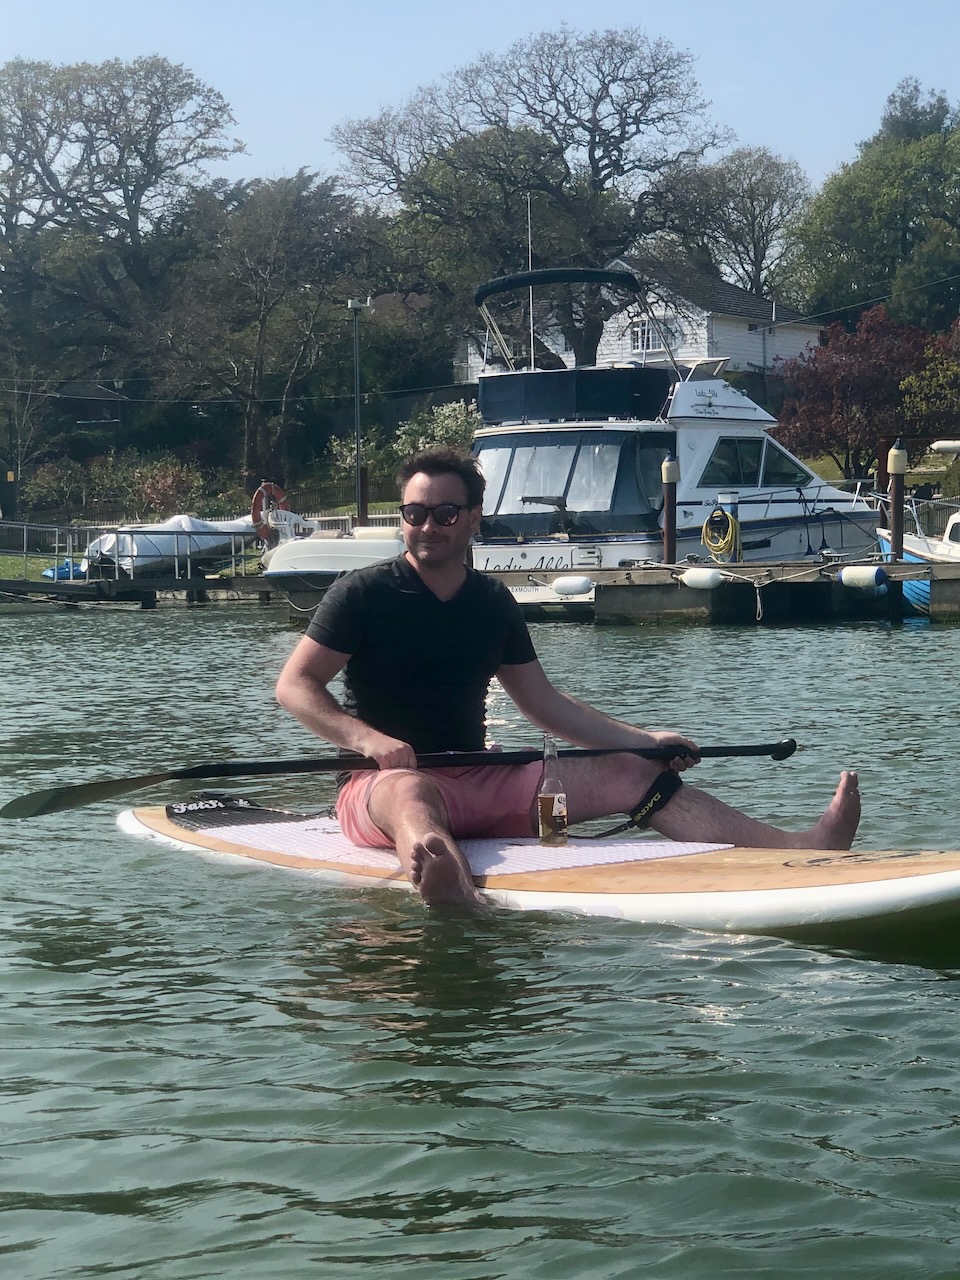 Photo of myself on a SUP as an informal photo. This isn't LinkedIn after all.